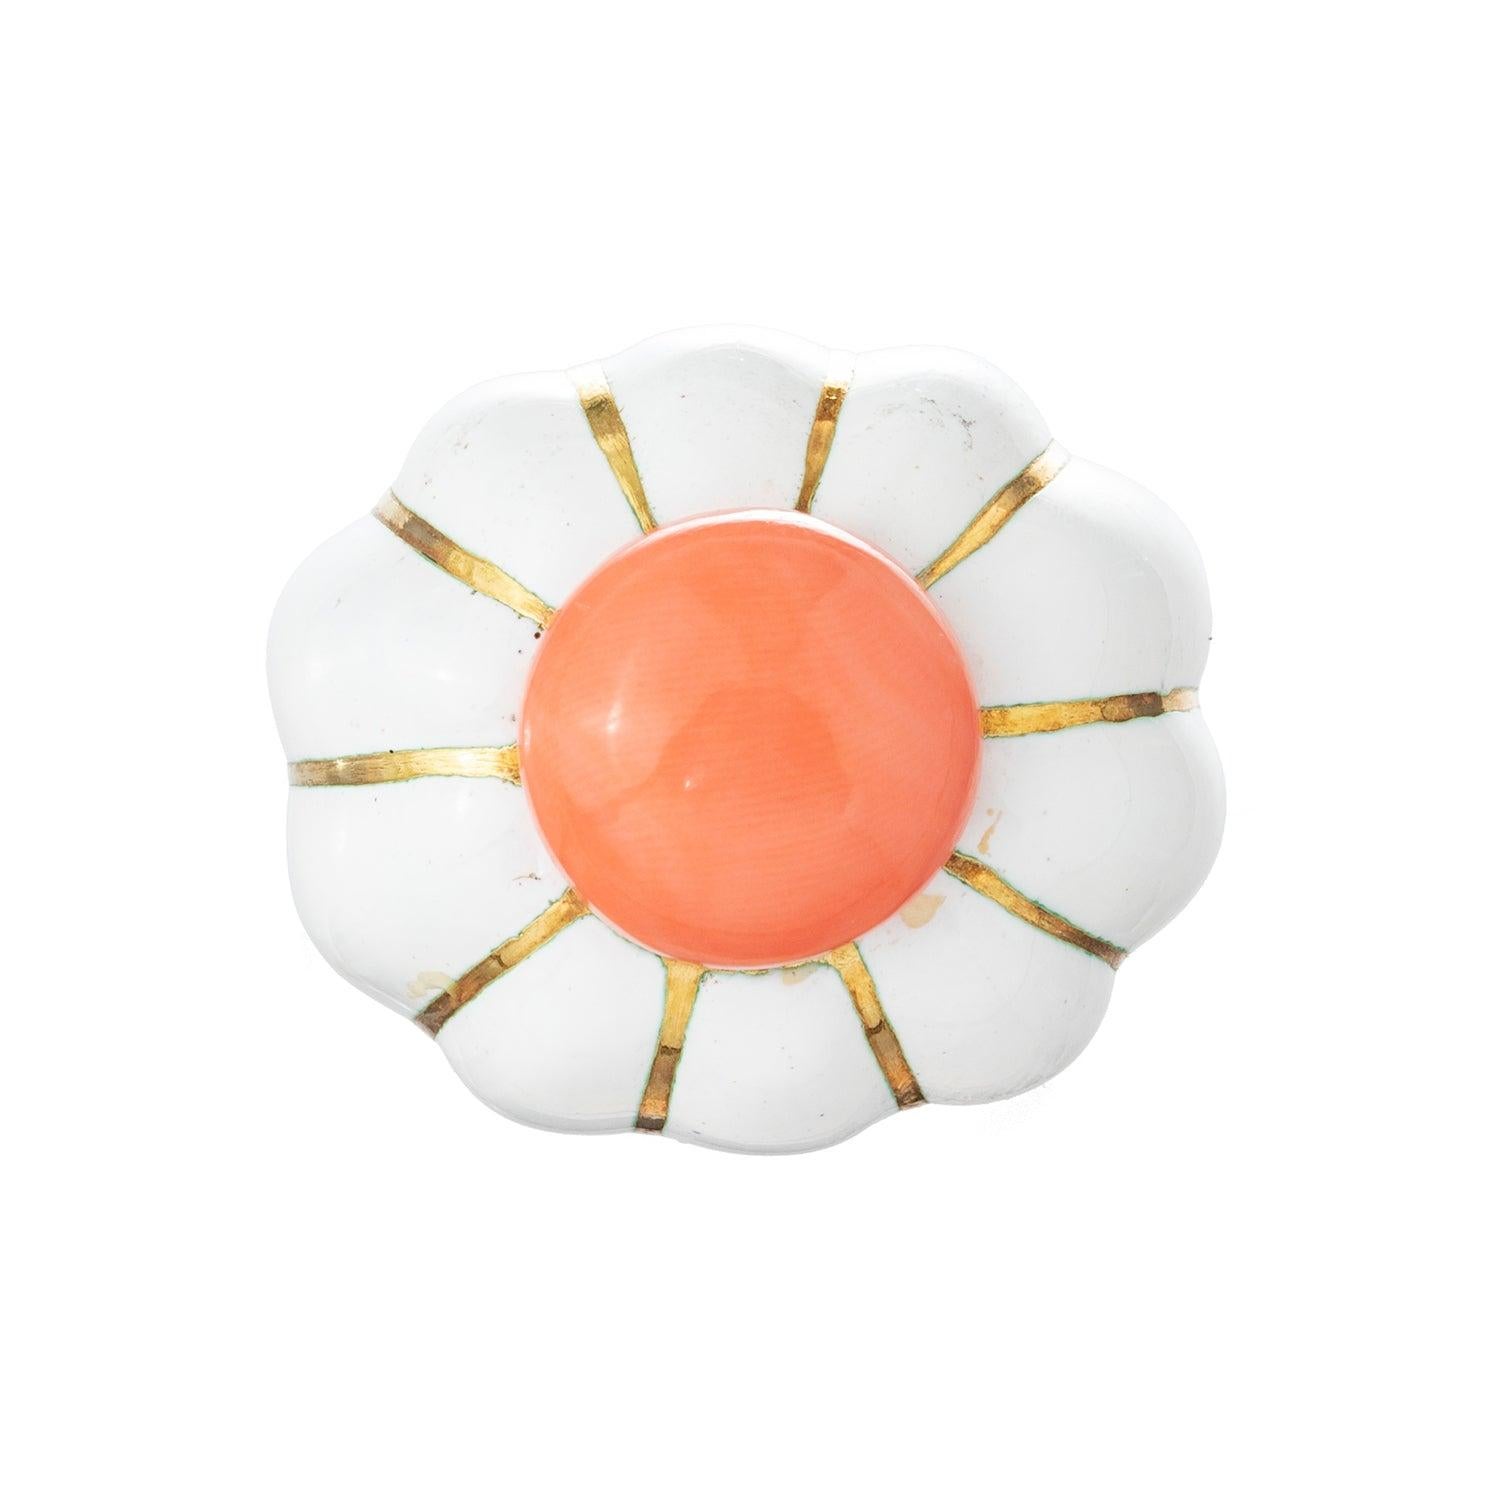 David Webb domed cocktail ring in 18k yellow gold decorated with white enamel panels and centering a button-shaped natural coral.  Coral measuring 13.55mm in diameter.  Signed '© WEBB 18k'.  Size 6.5.